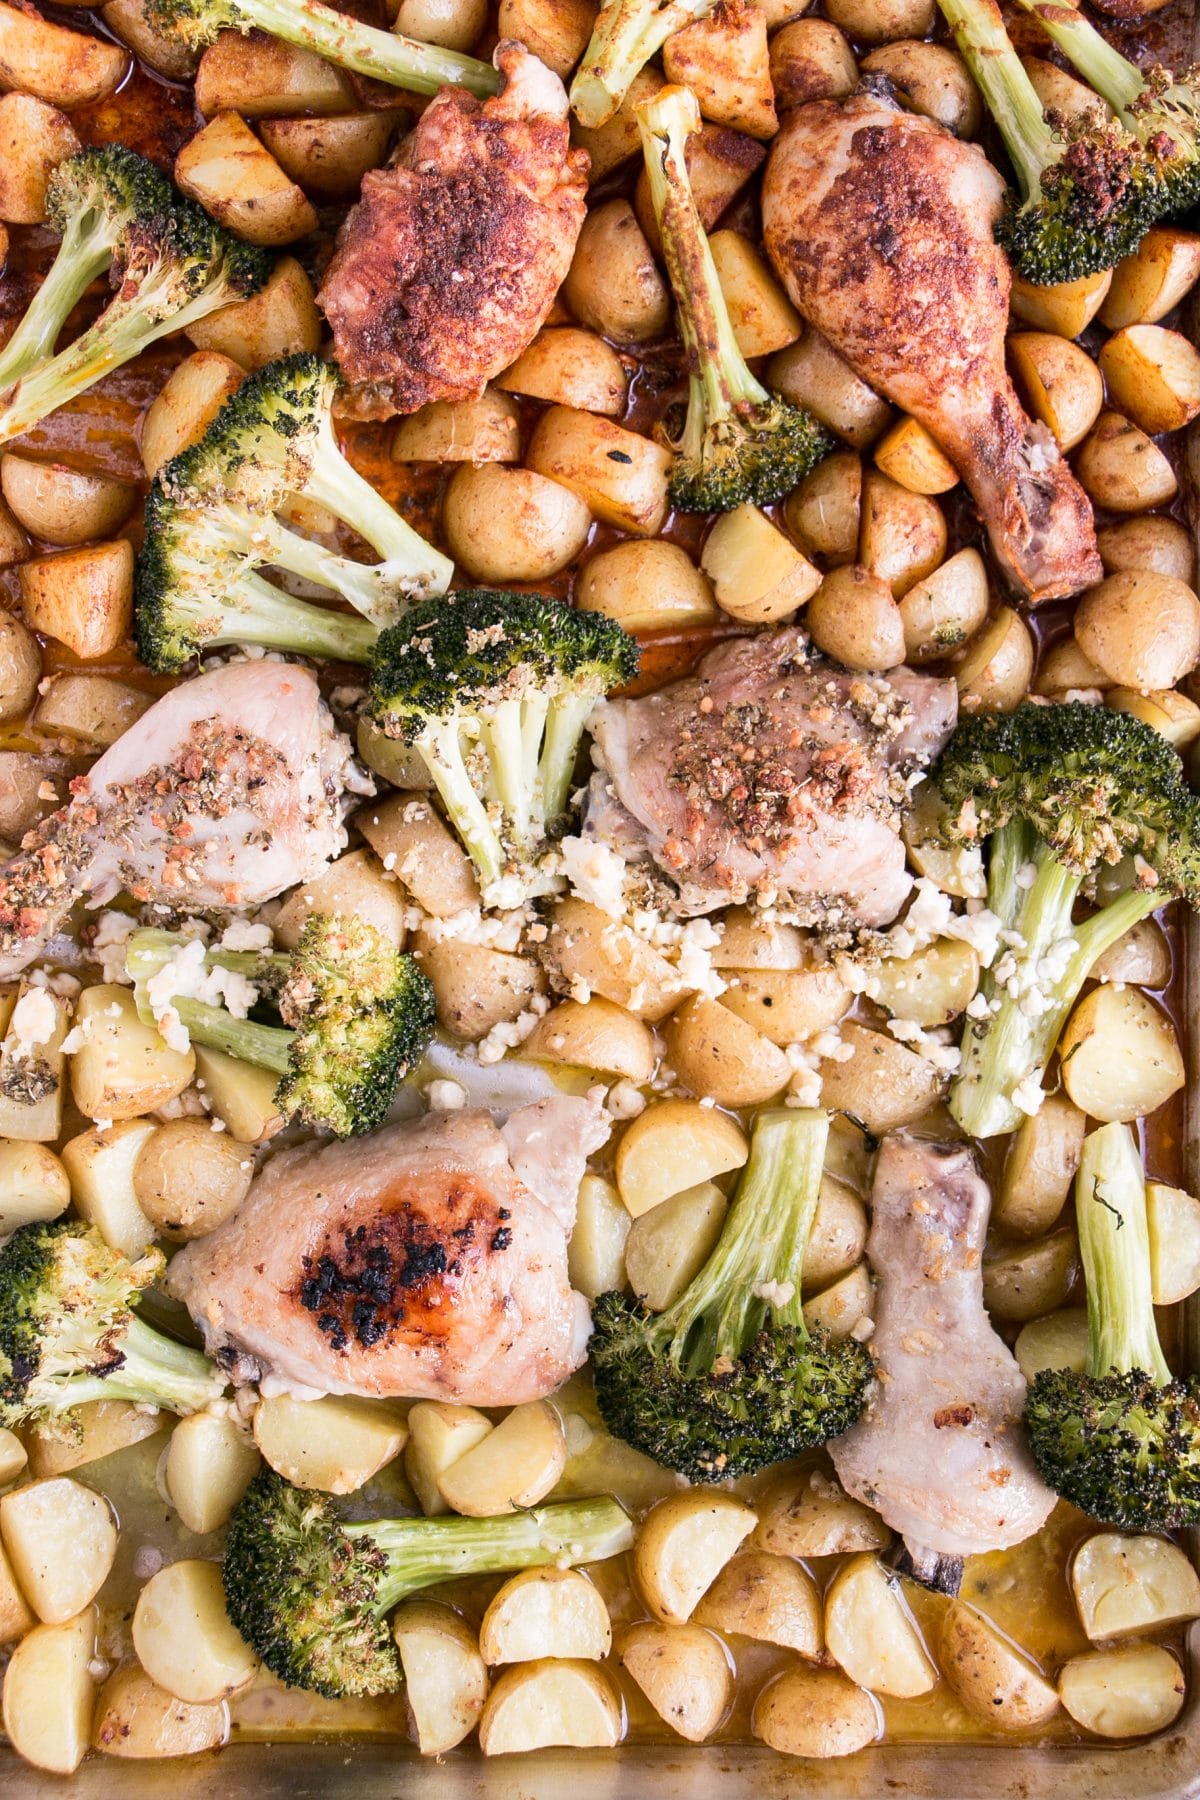 Sheet Pan Chicken, Potatoes and Broccoli 3 Ways with Oregano Feta, Lemon Garlic, and Sweet Paprika. Easy and low maintenance dinner to have on the table in 30 minutes or less. #dinner #onepan #chicken